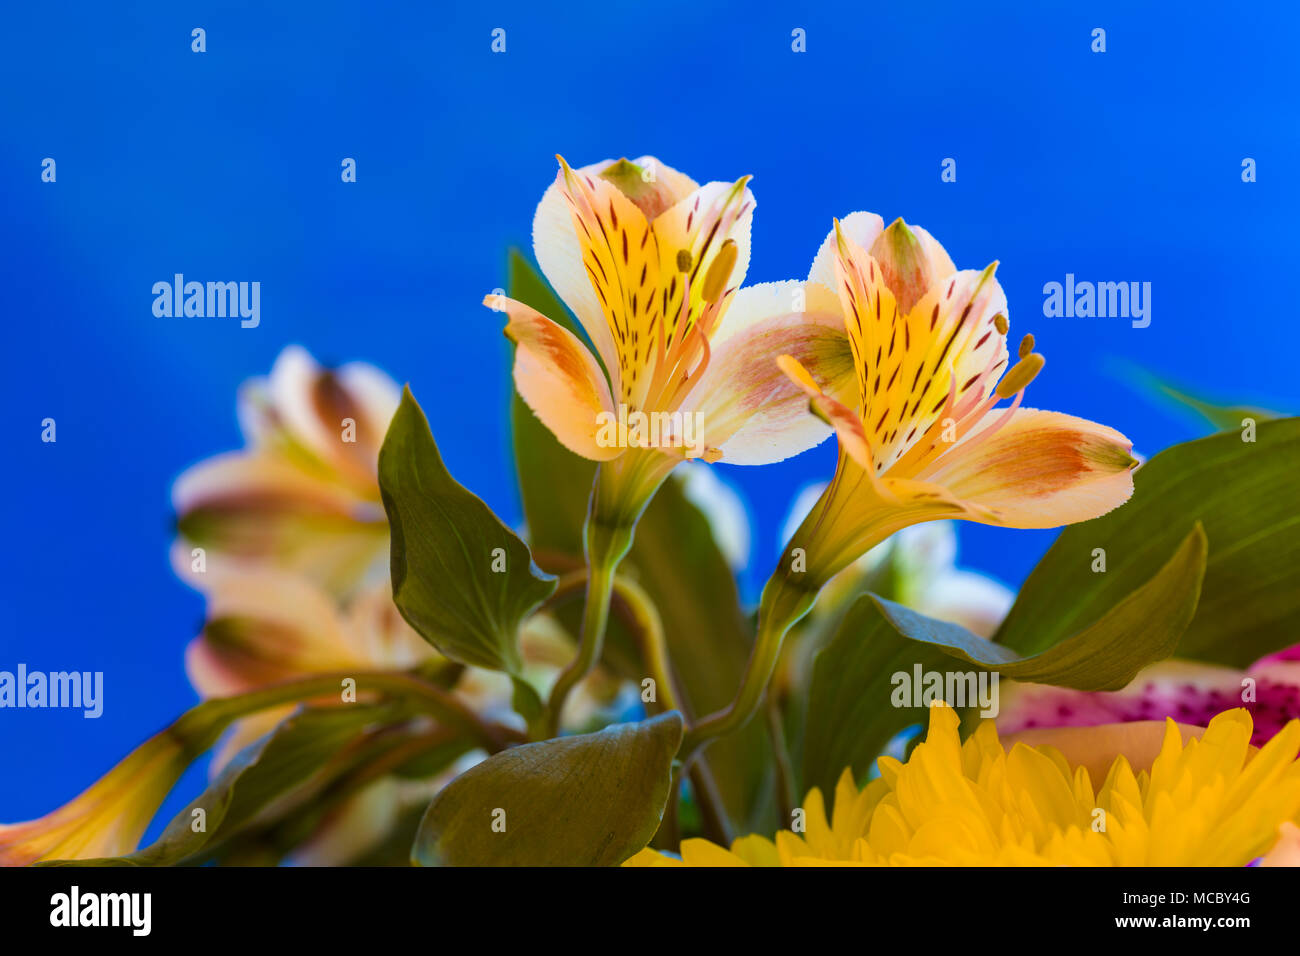 Closeup of yellow Alstroemerias flowers commonly know as Peruvian Lilies or Lily of the Incas against a blue background Stock Photo